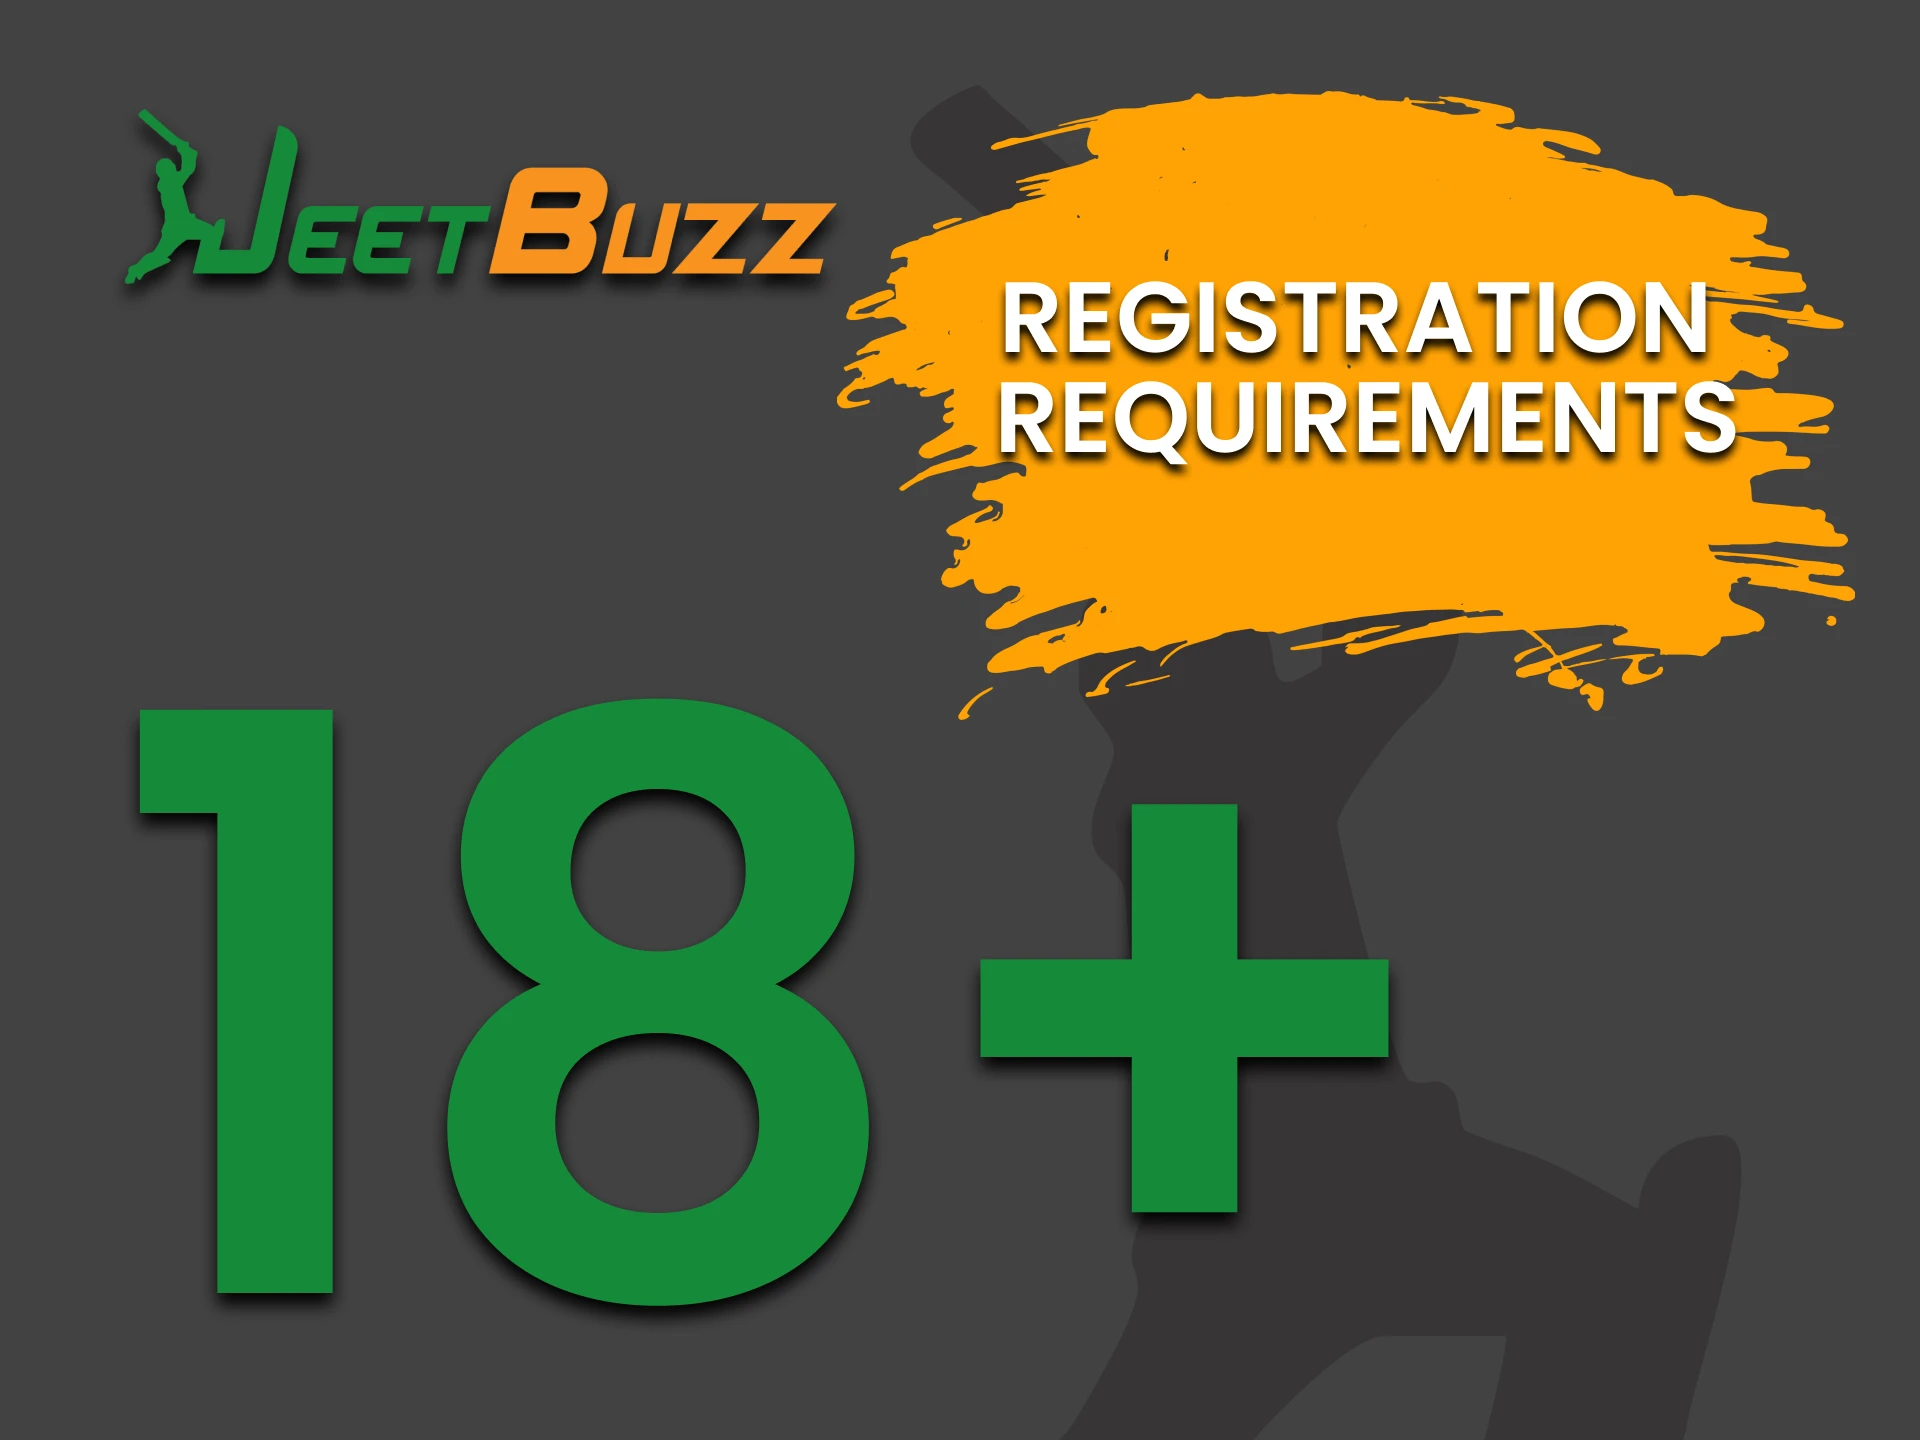 Learn about the registration requirements for JeetBuzz.